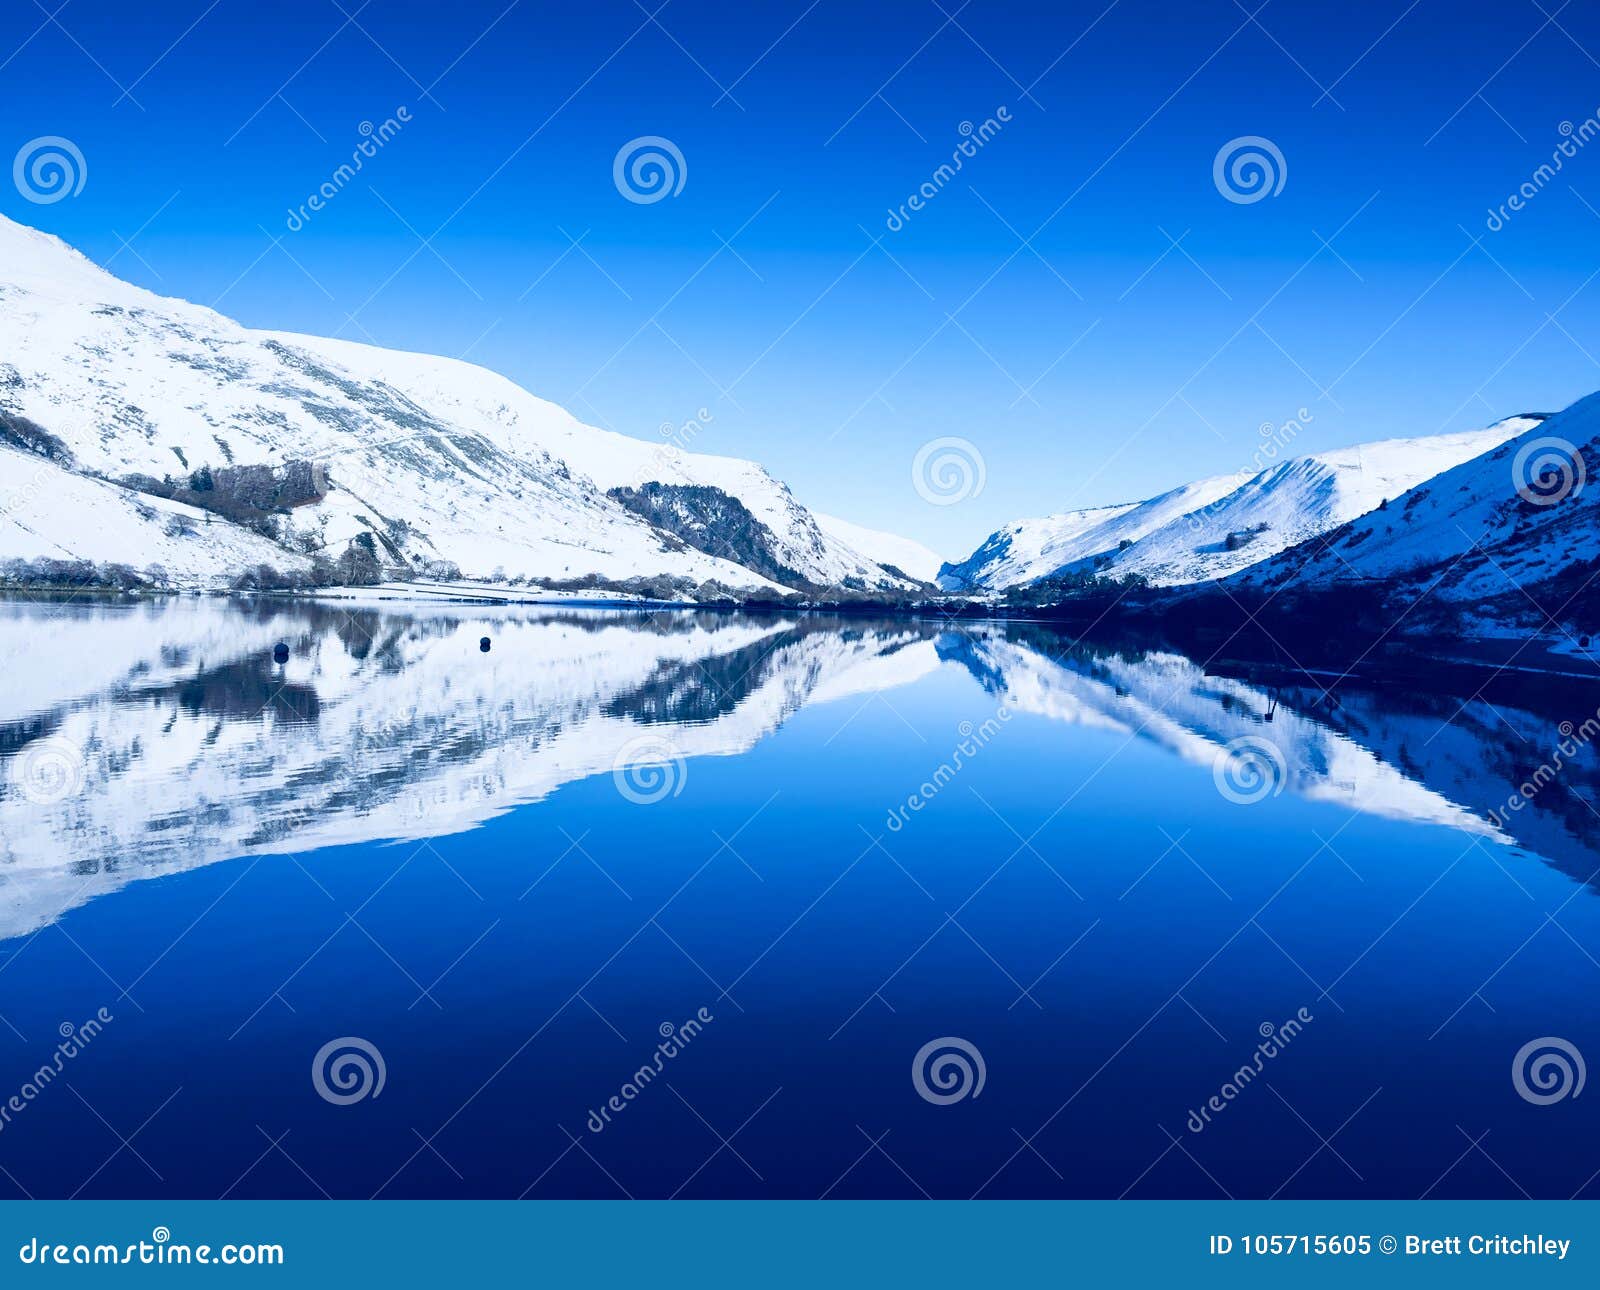 Serenity and Tranquility Winter in Wales Stock Image - Image of arthur